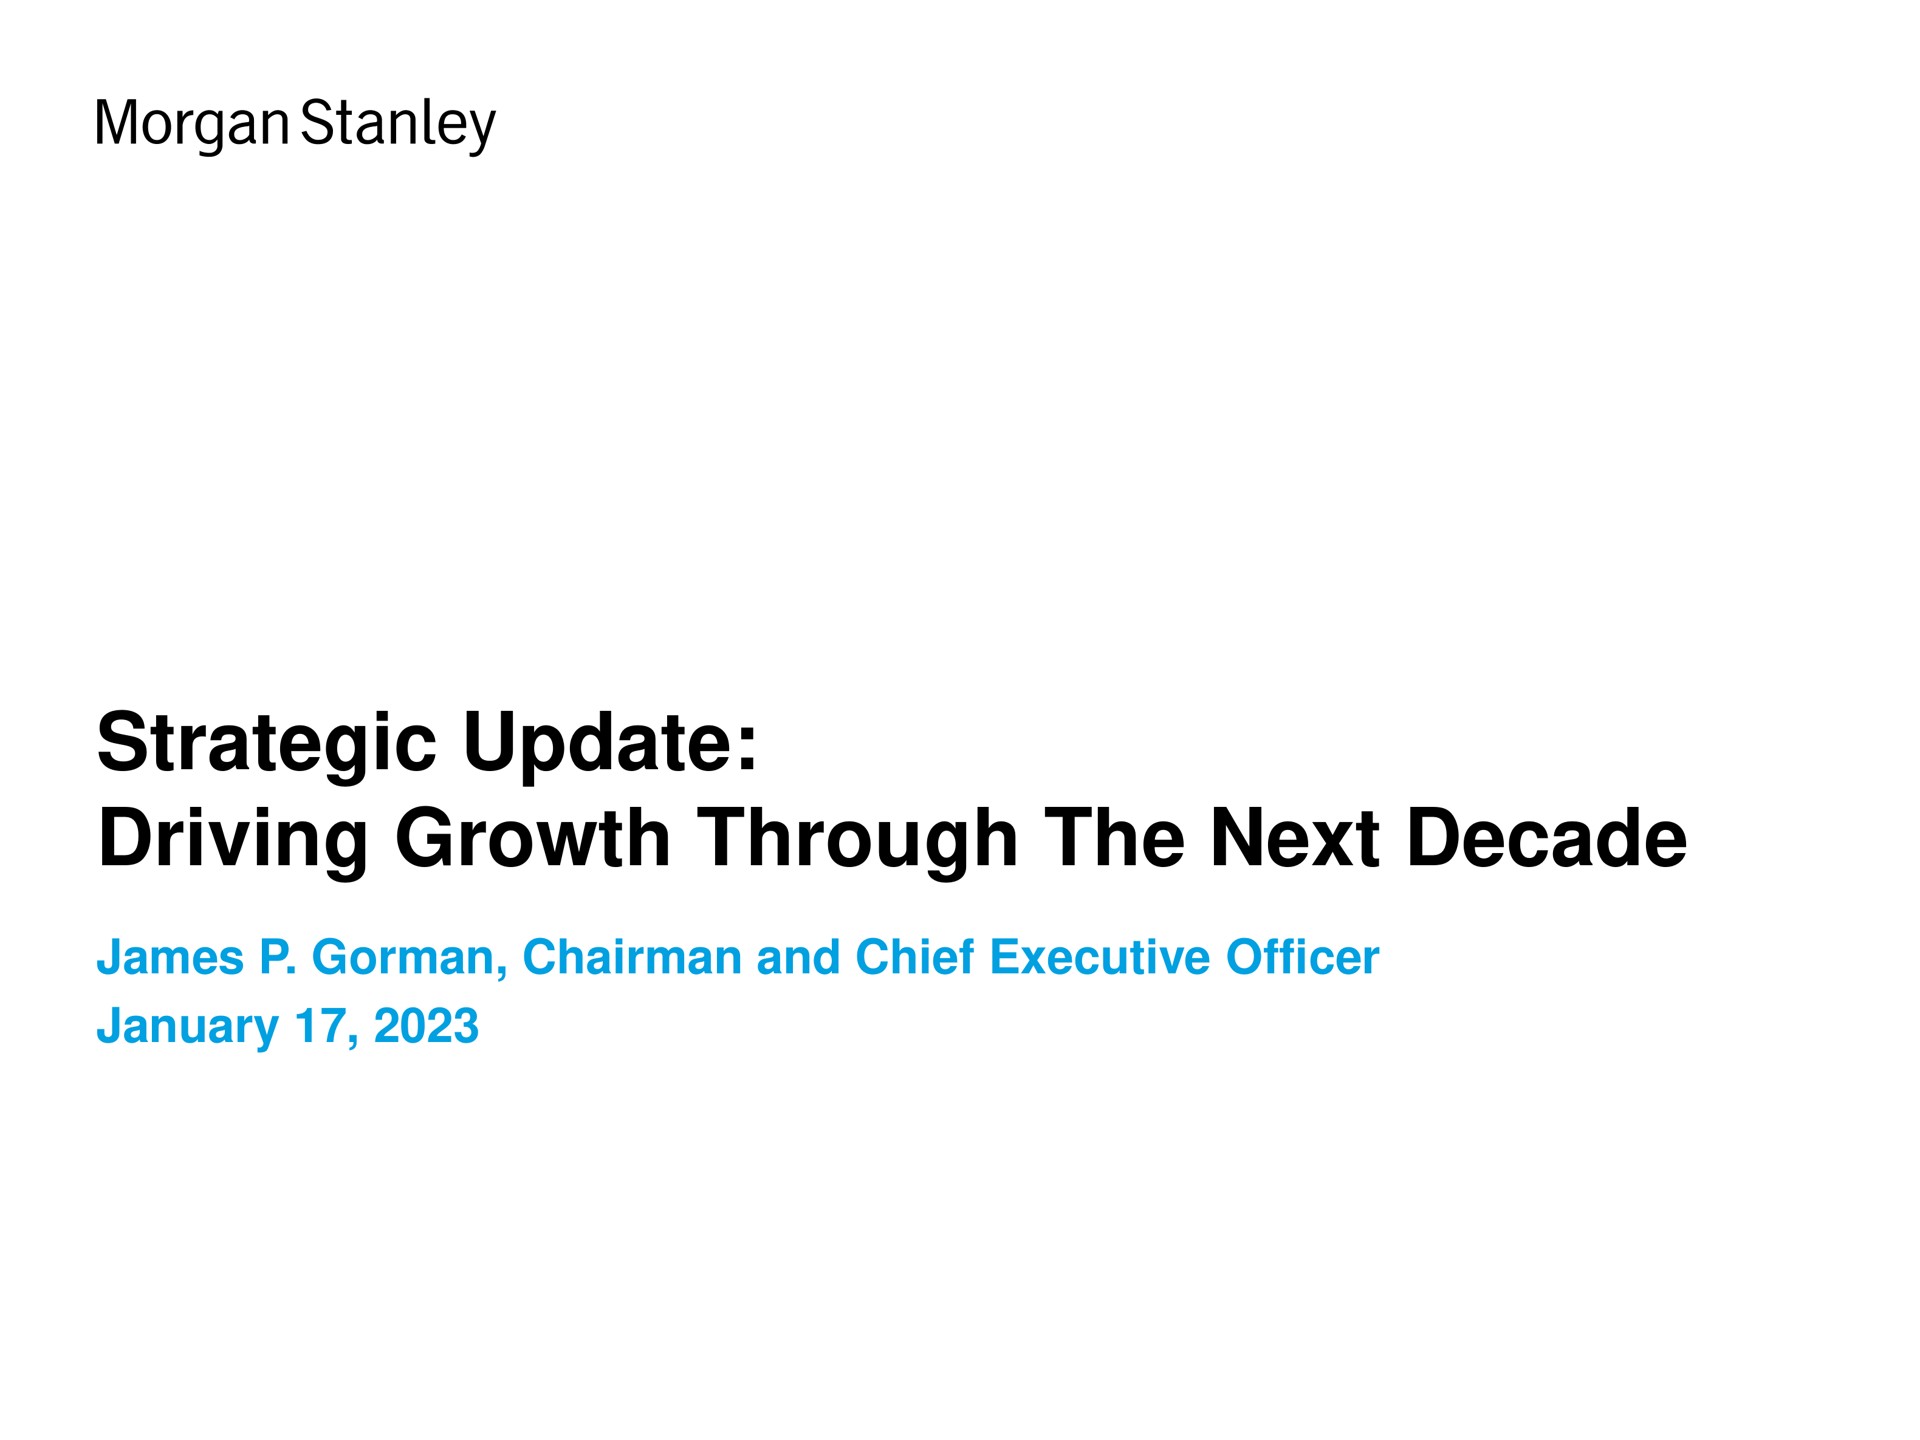 strategic update driving growth through the next decade james chairman and chief executive officer morgan | Morgan Stanley